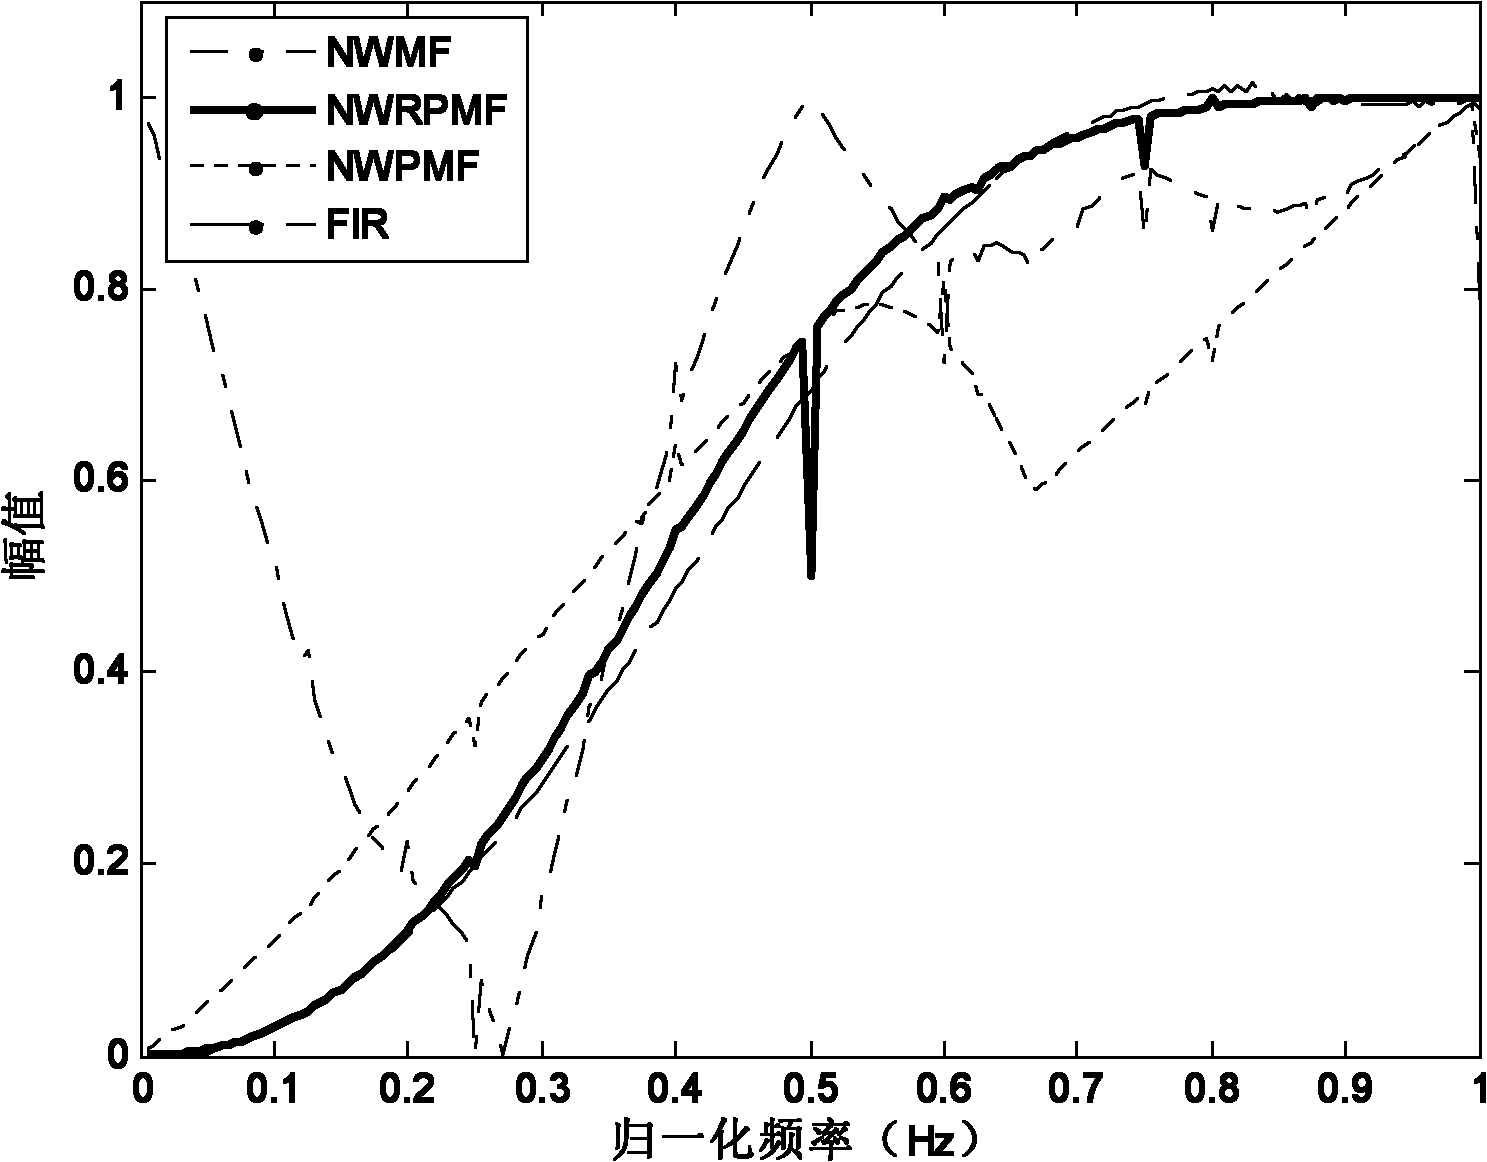 Simplified weighted repeat pseudo-median filtering method with negative coefficients